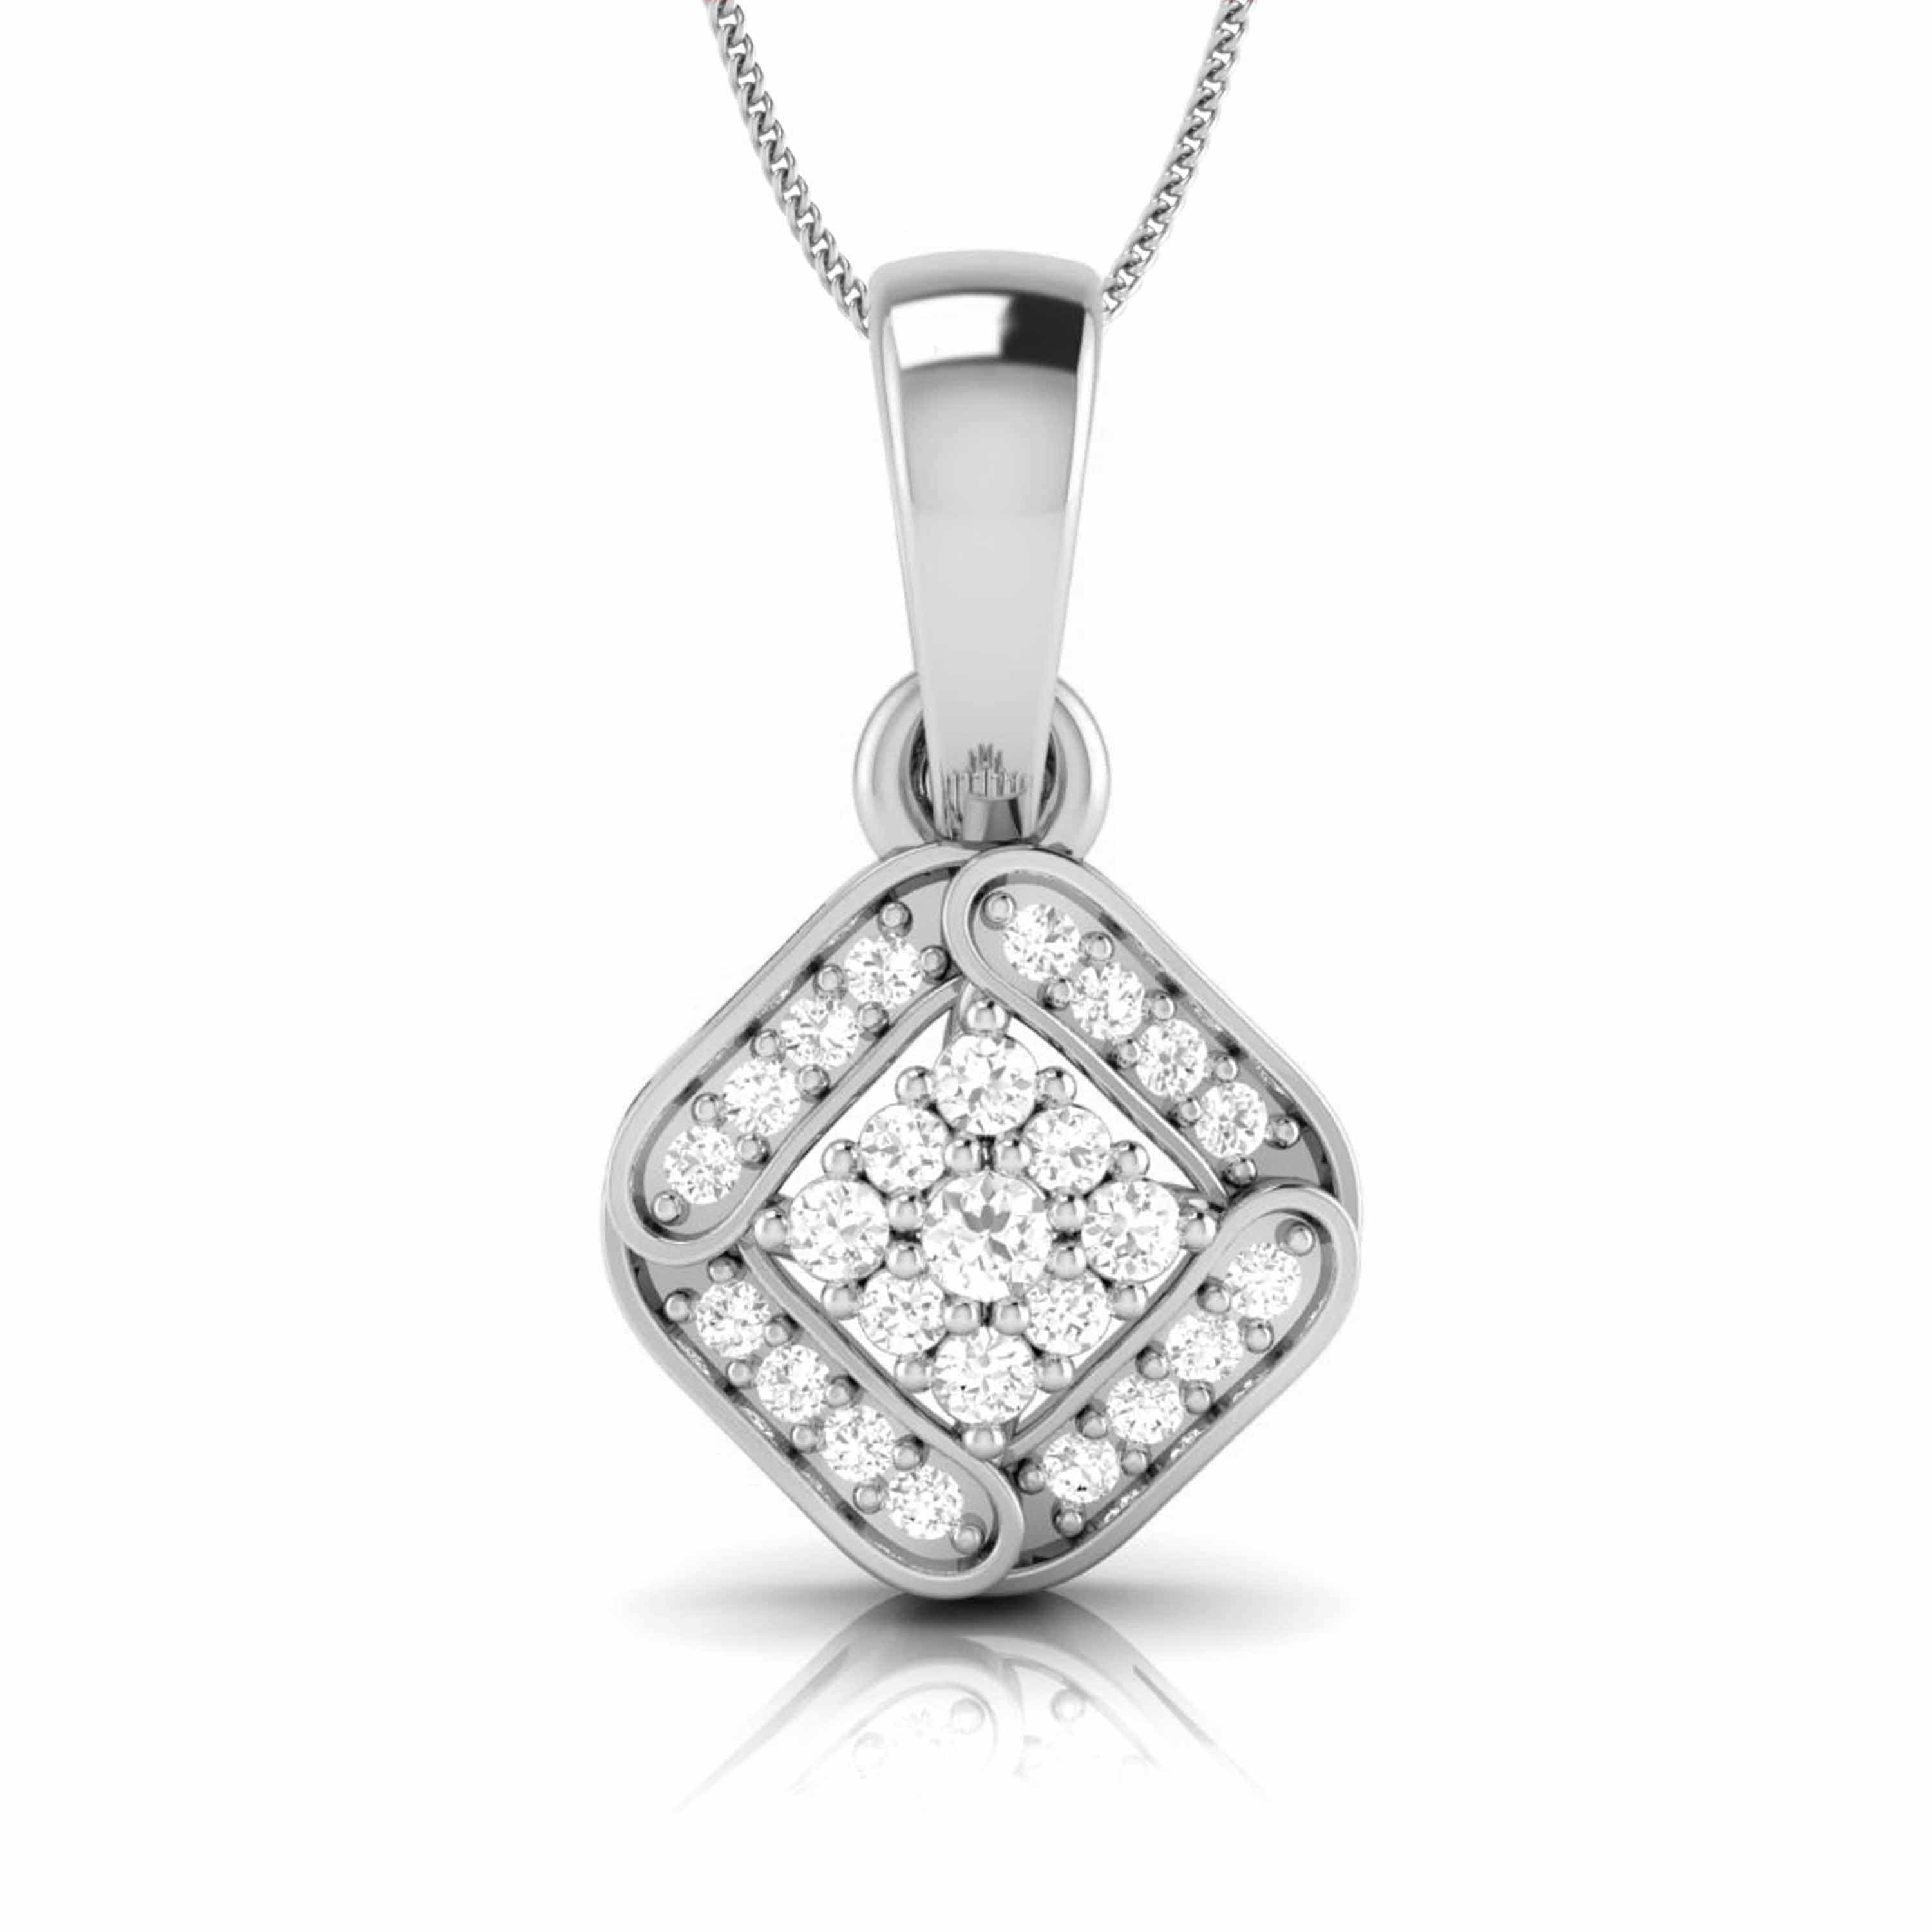 White Gold Diamond Necklace - 1.28 cttw - David & Sons Fine Jewelers %